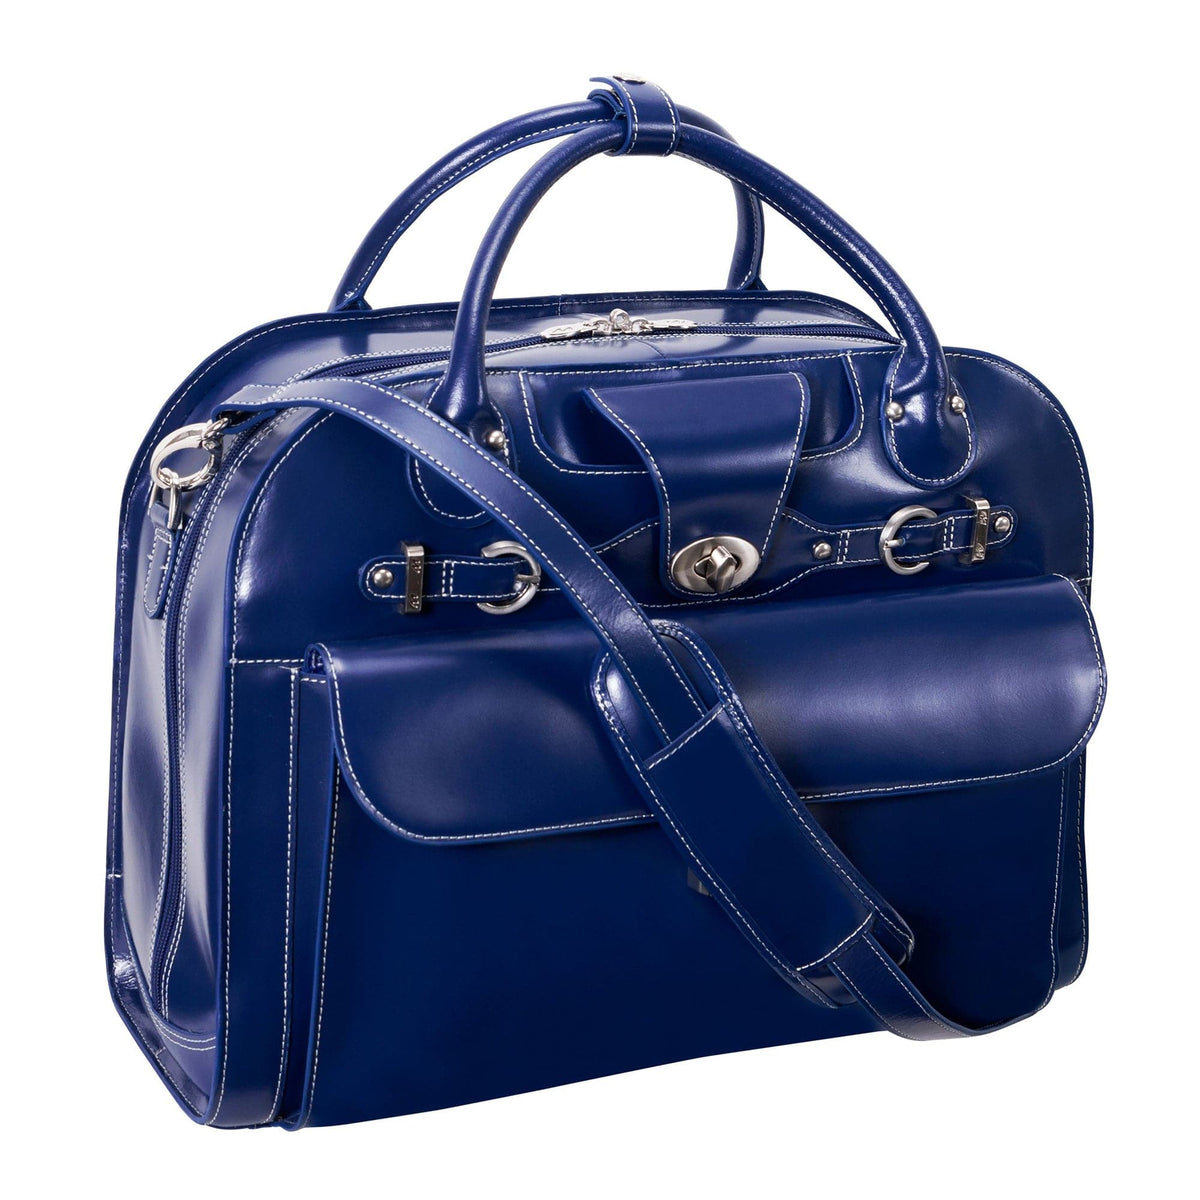 McKlein USA Roseville 15" Leather Fly-Through Checkpoint-Friendly Patented Detachable -Wheeled Ladies' Laptop Briefcase